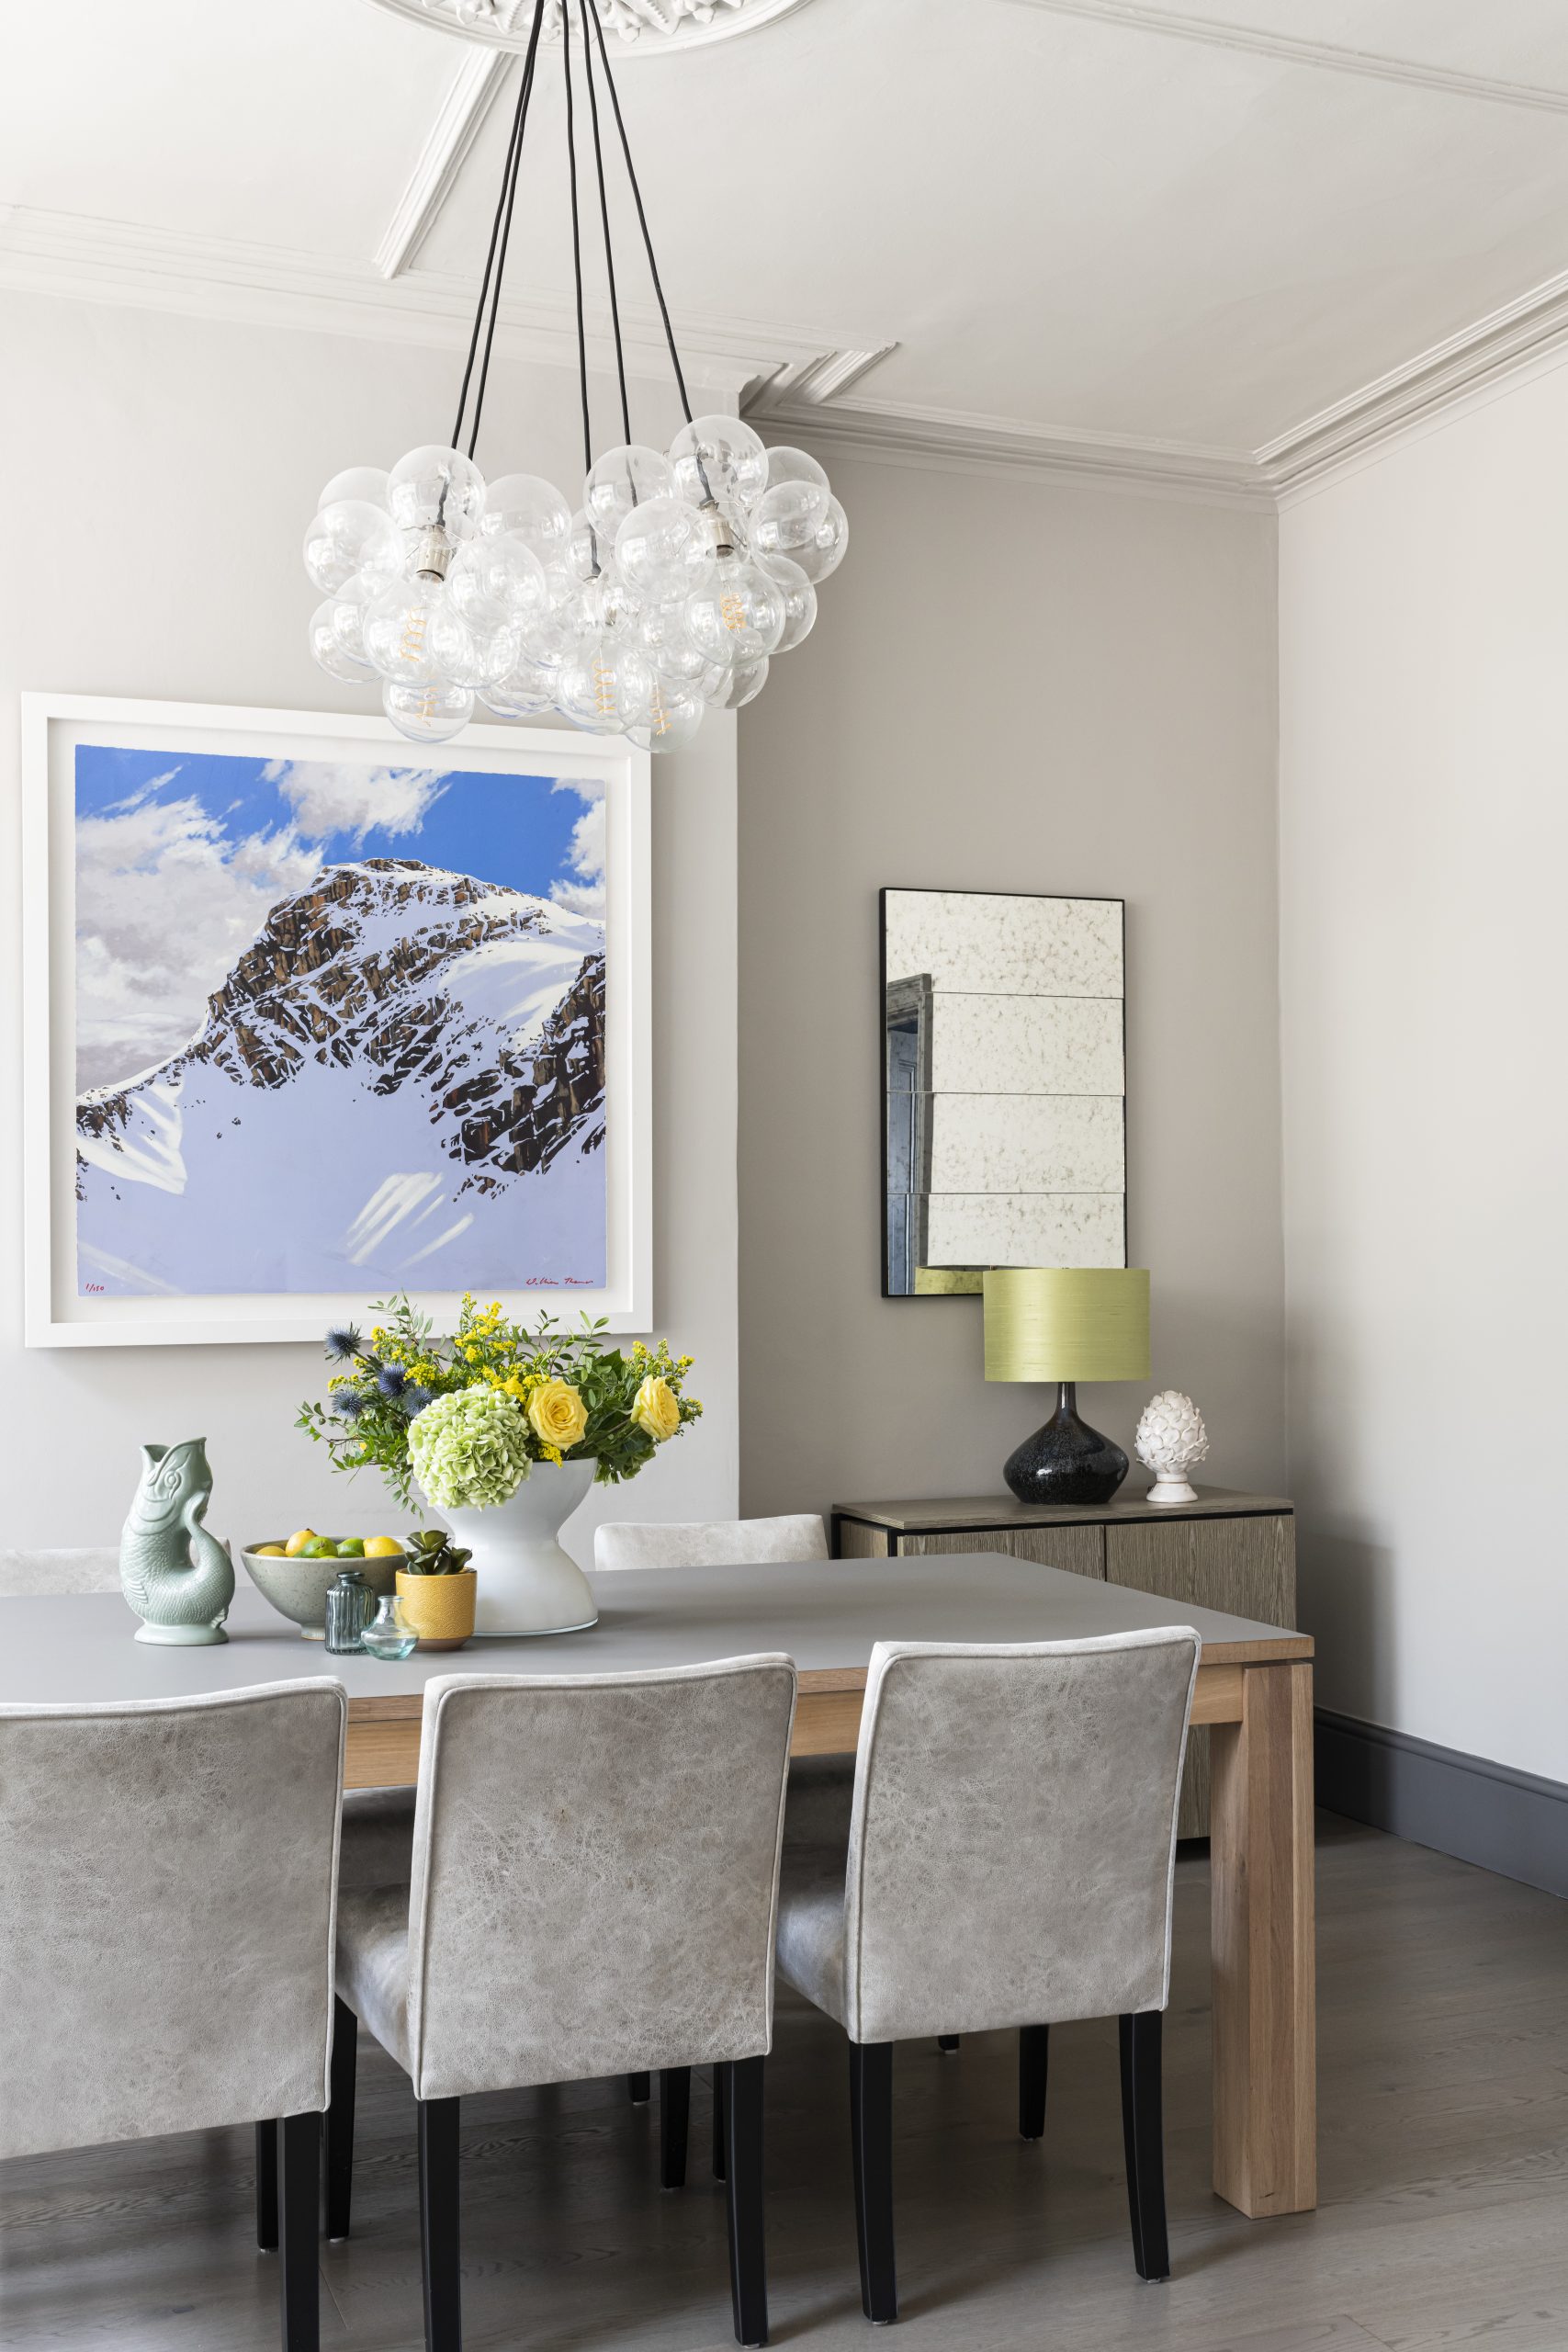 Dining area in home design by Emma Green